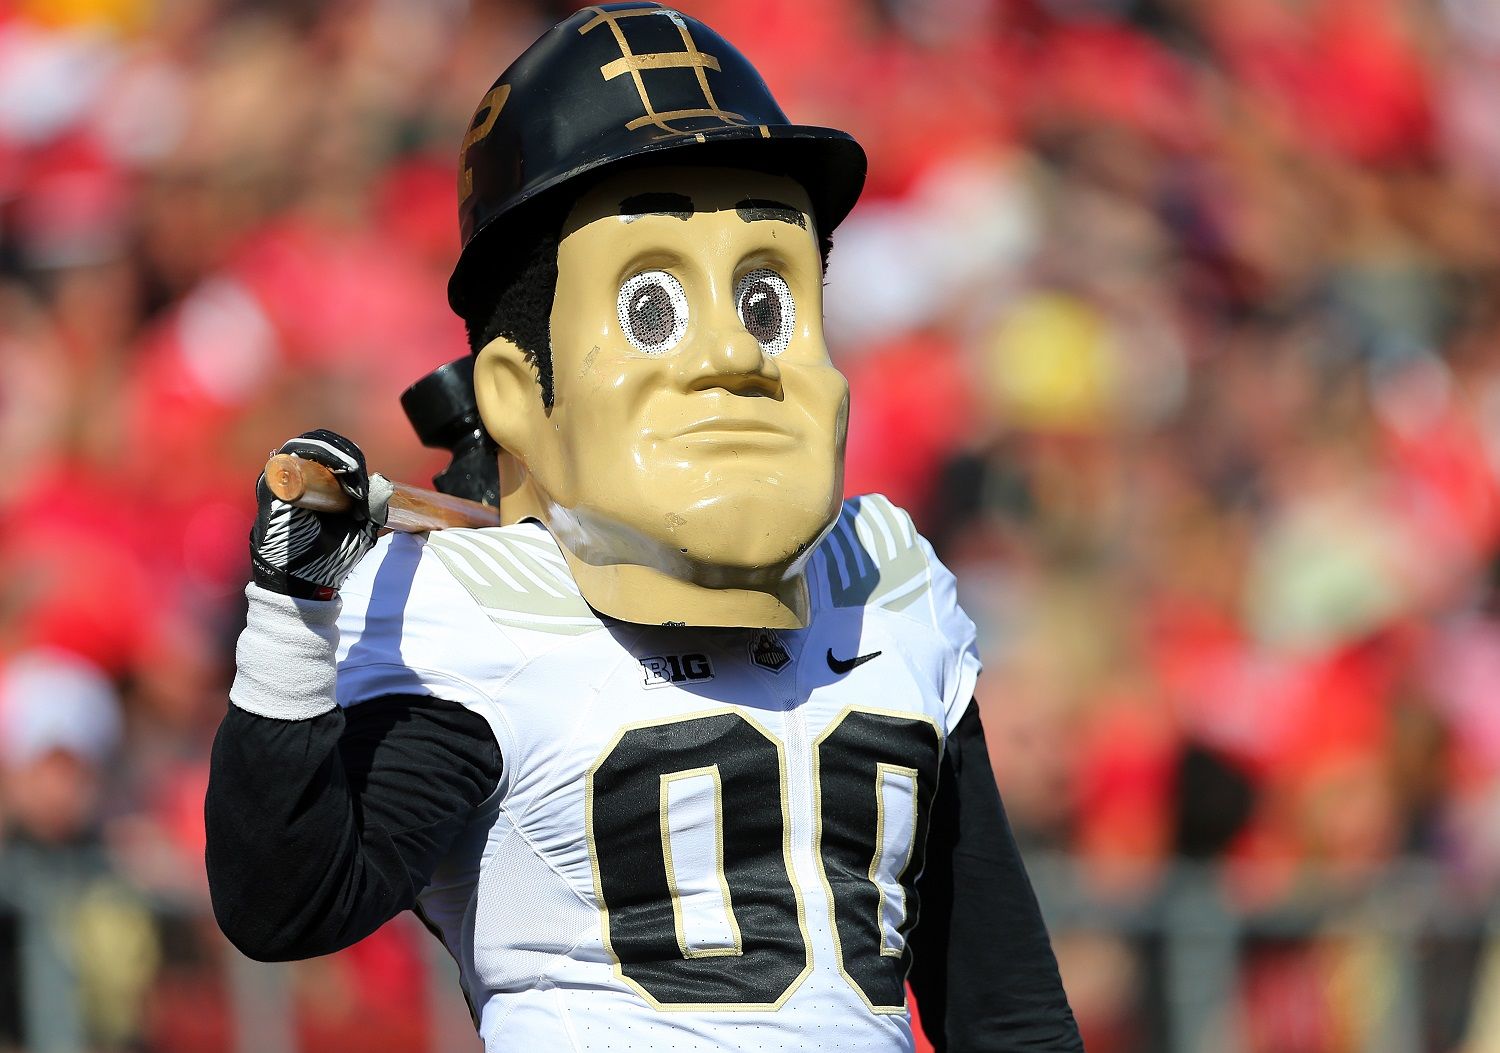 PISCATAWAY, NJ - OCTOBER 21: Purdue Pete, mascot of Purdue Boilermakers during a game against the Rutgers Scarlet Knights on October 21, 2017 in Piscataway, New Jersey. (Photo by Rich Schultz/Getty Images)